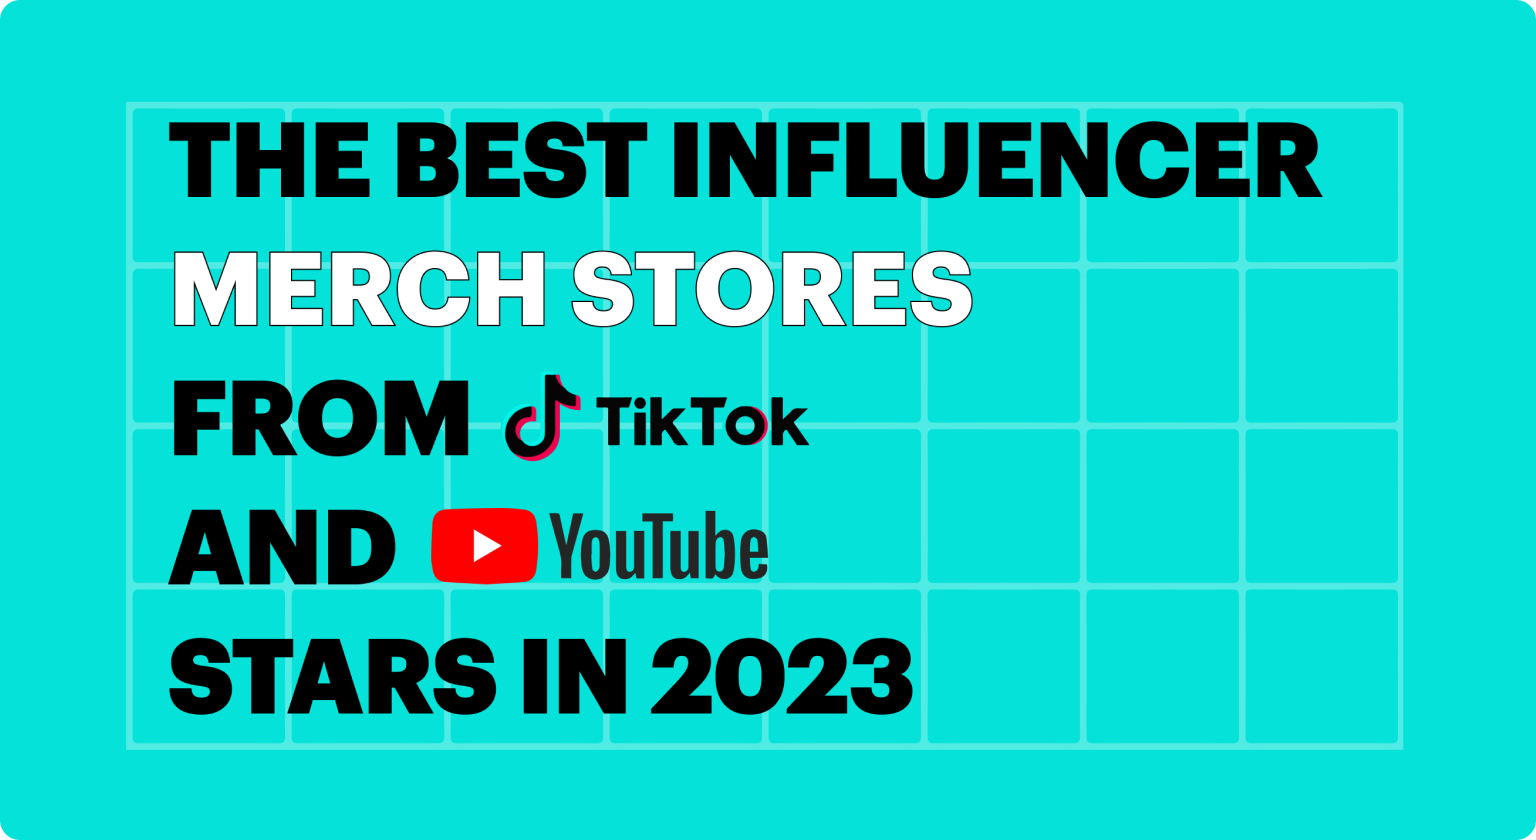 Top 10 Merch Stores to Power Your Merch Sales in 2023